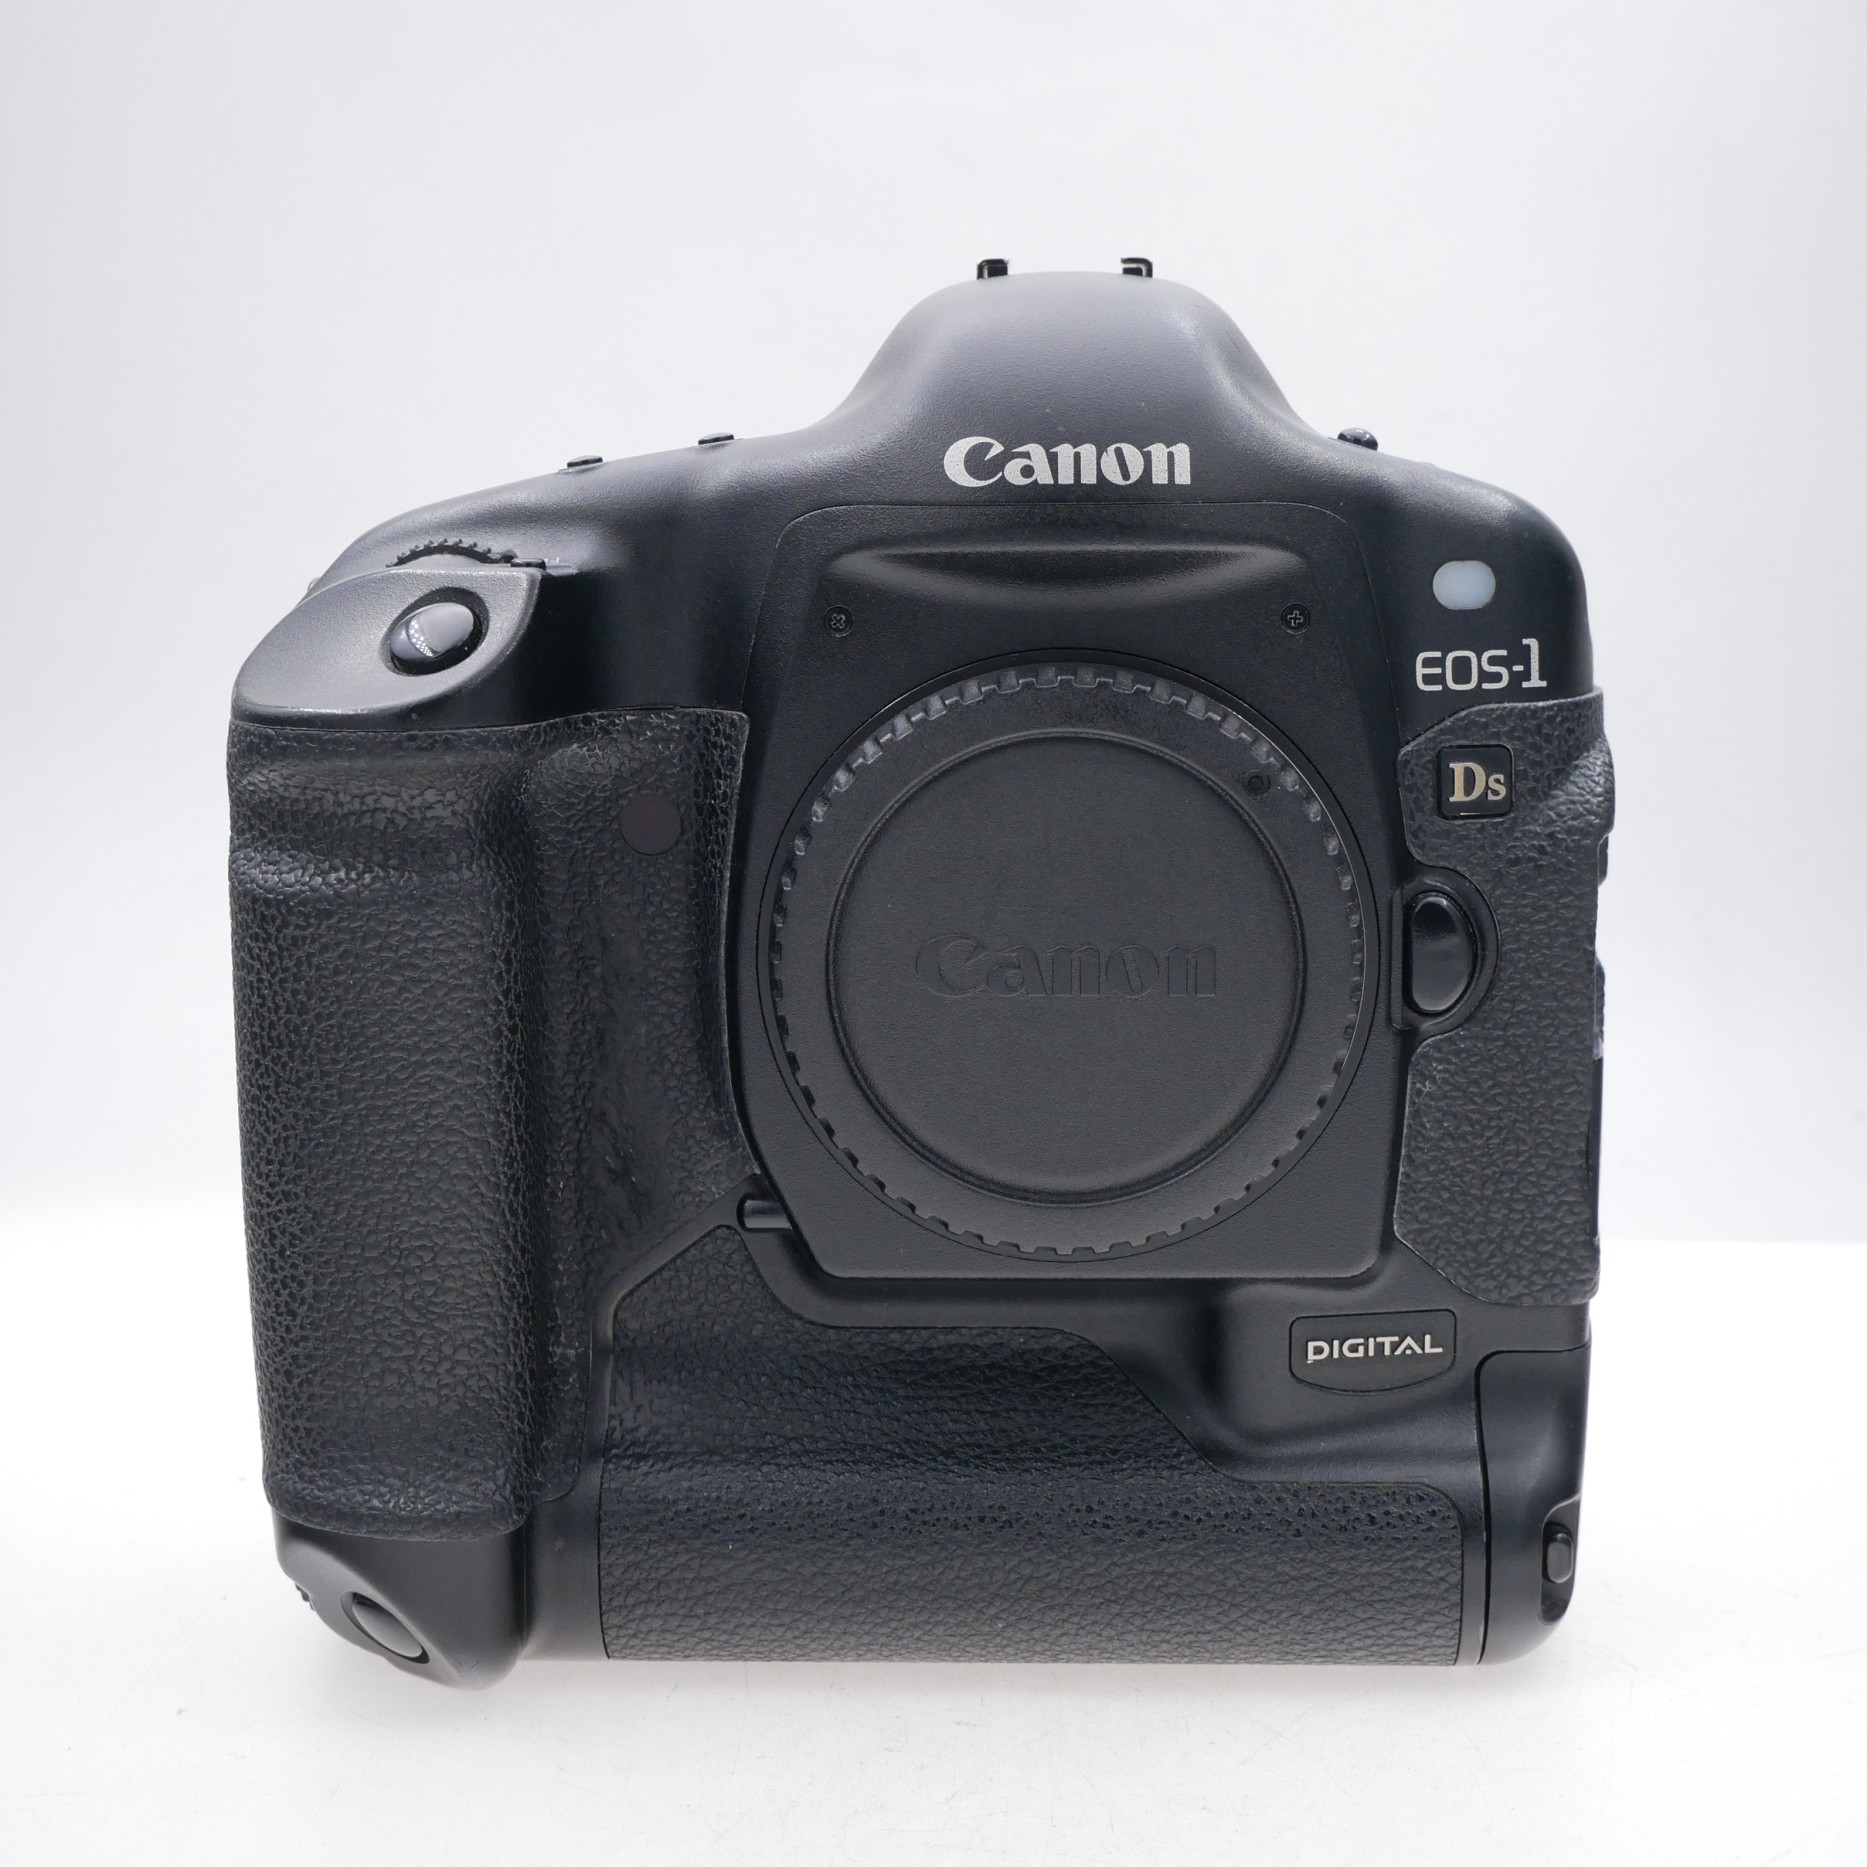 Canon EOS-1 Ds Body Only 62,745 Frames